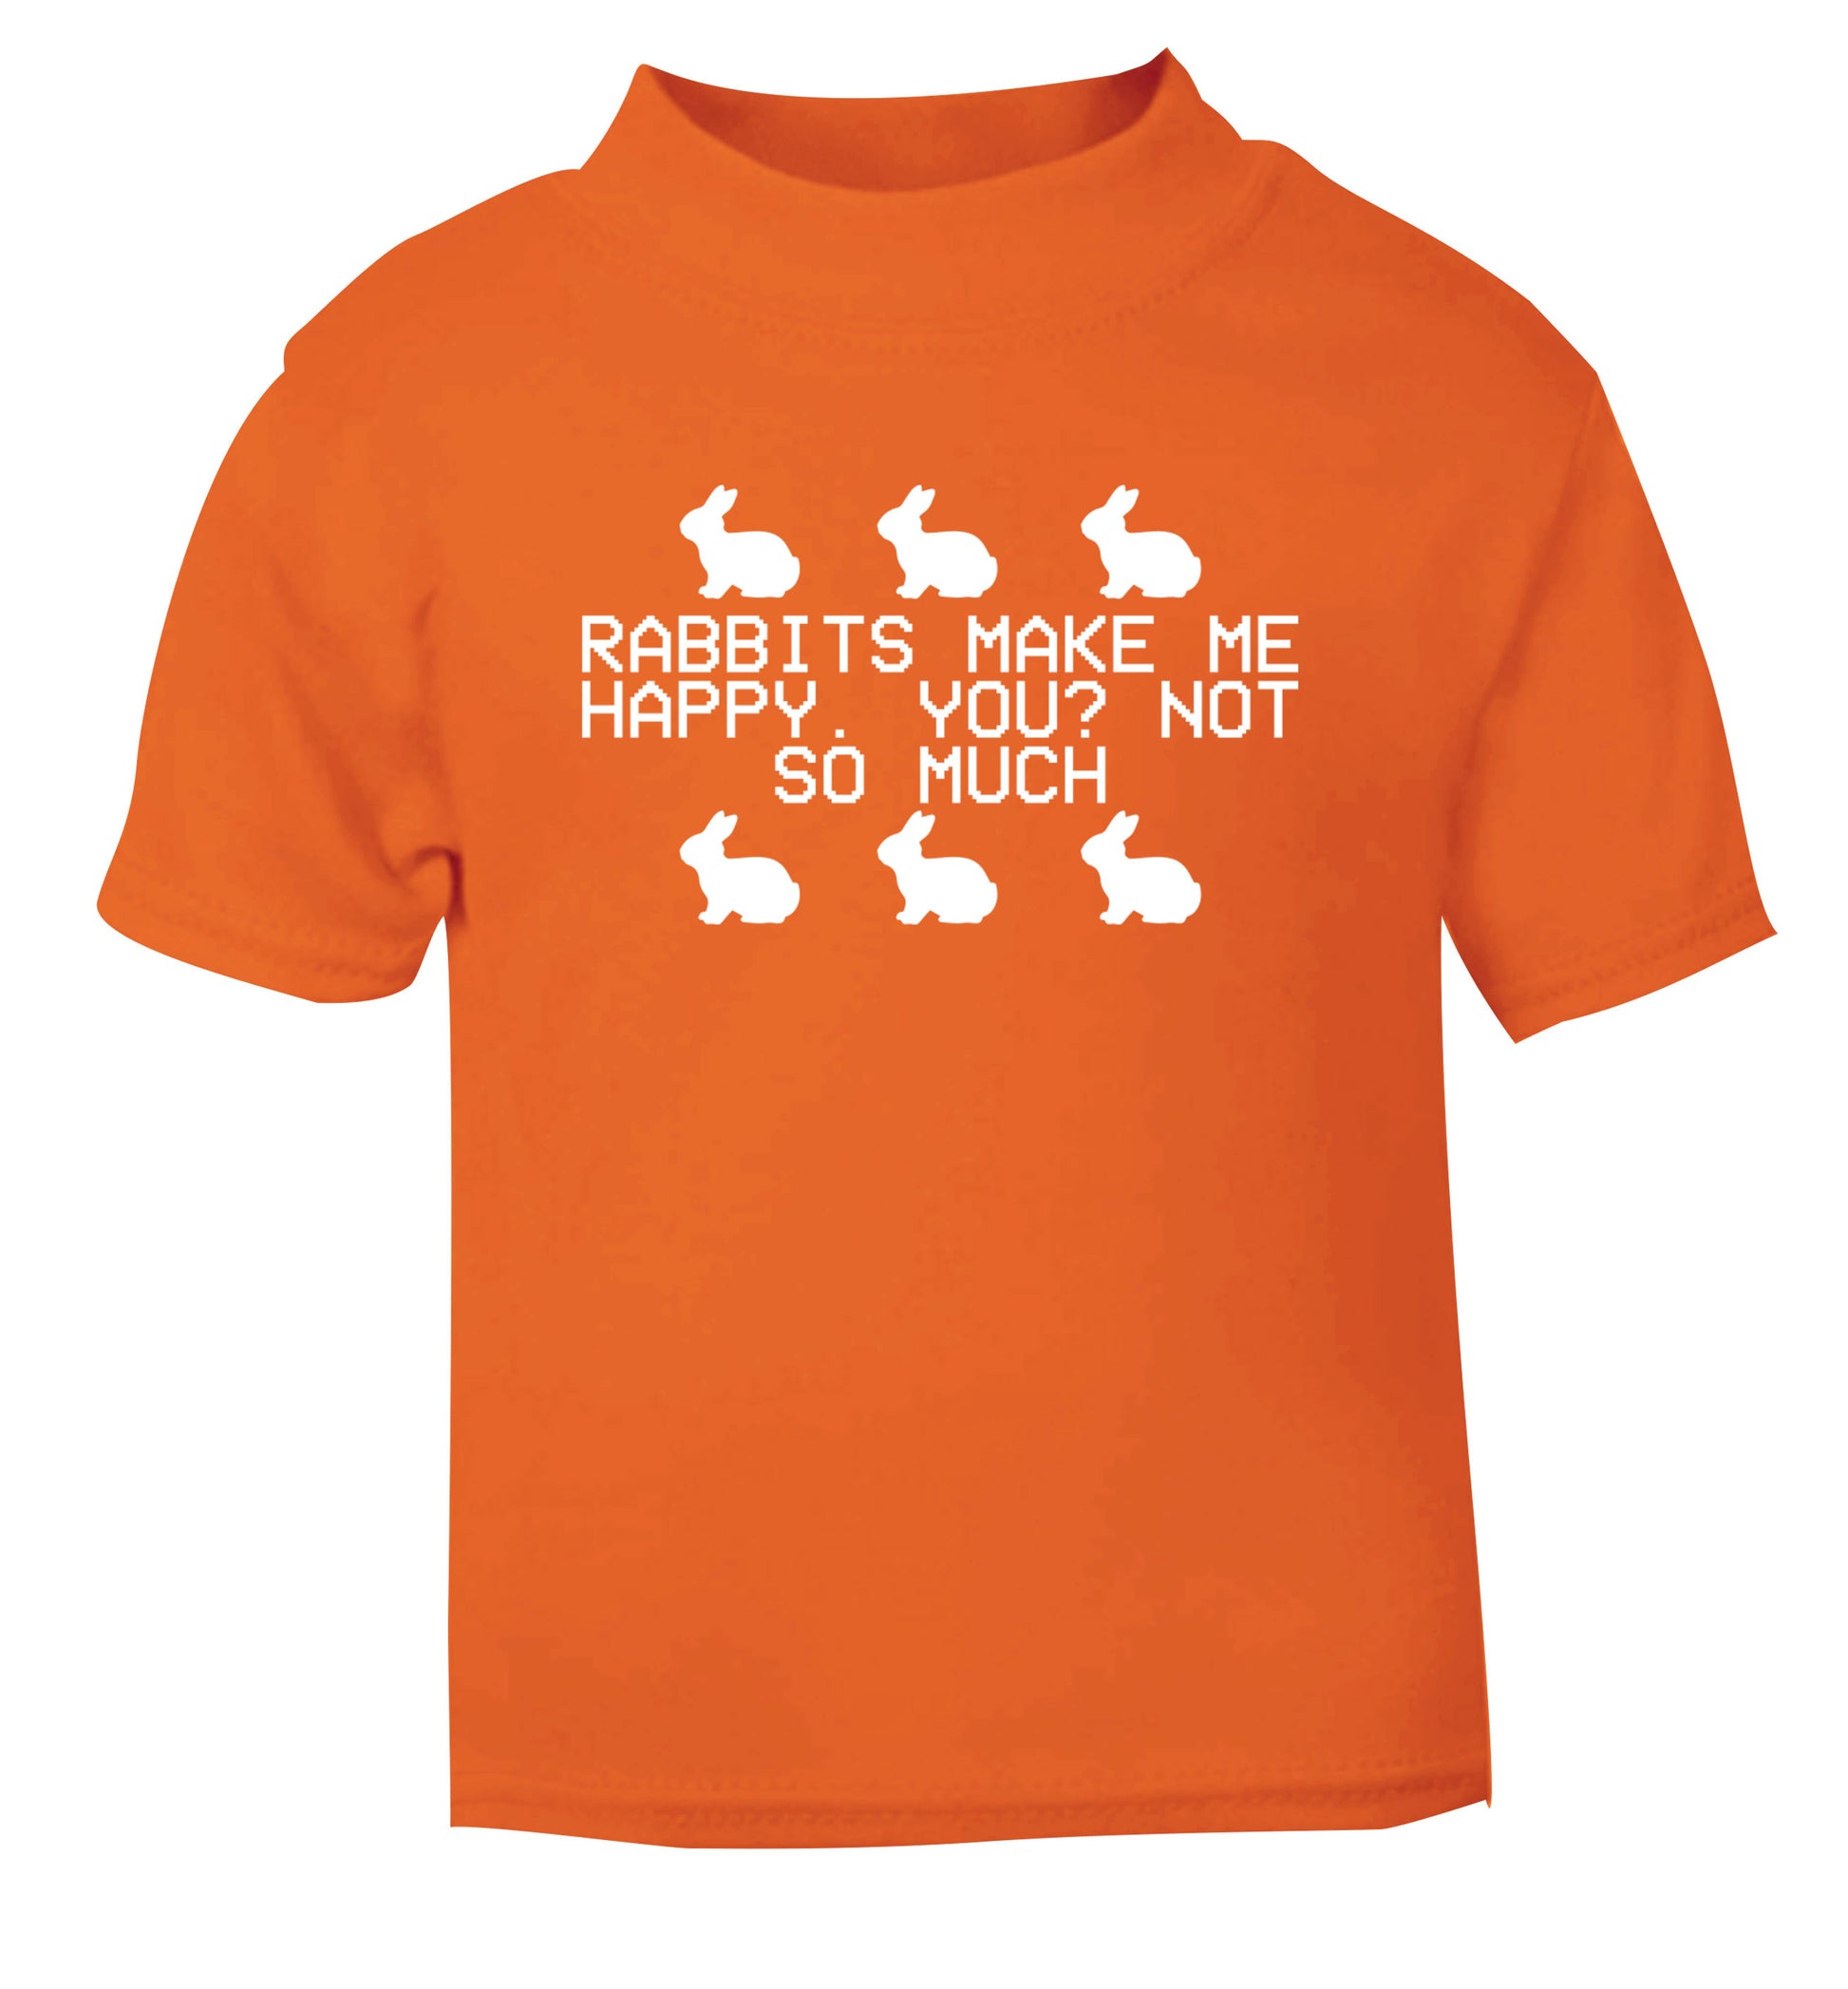 Rabbits make me happy, you not so much orange Baby Toddler Tshirt 2 Years